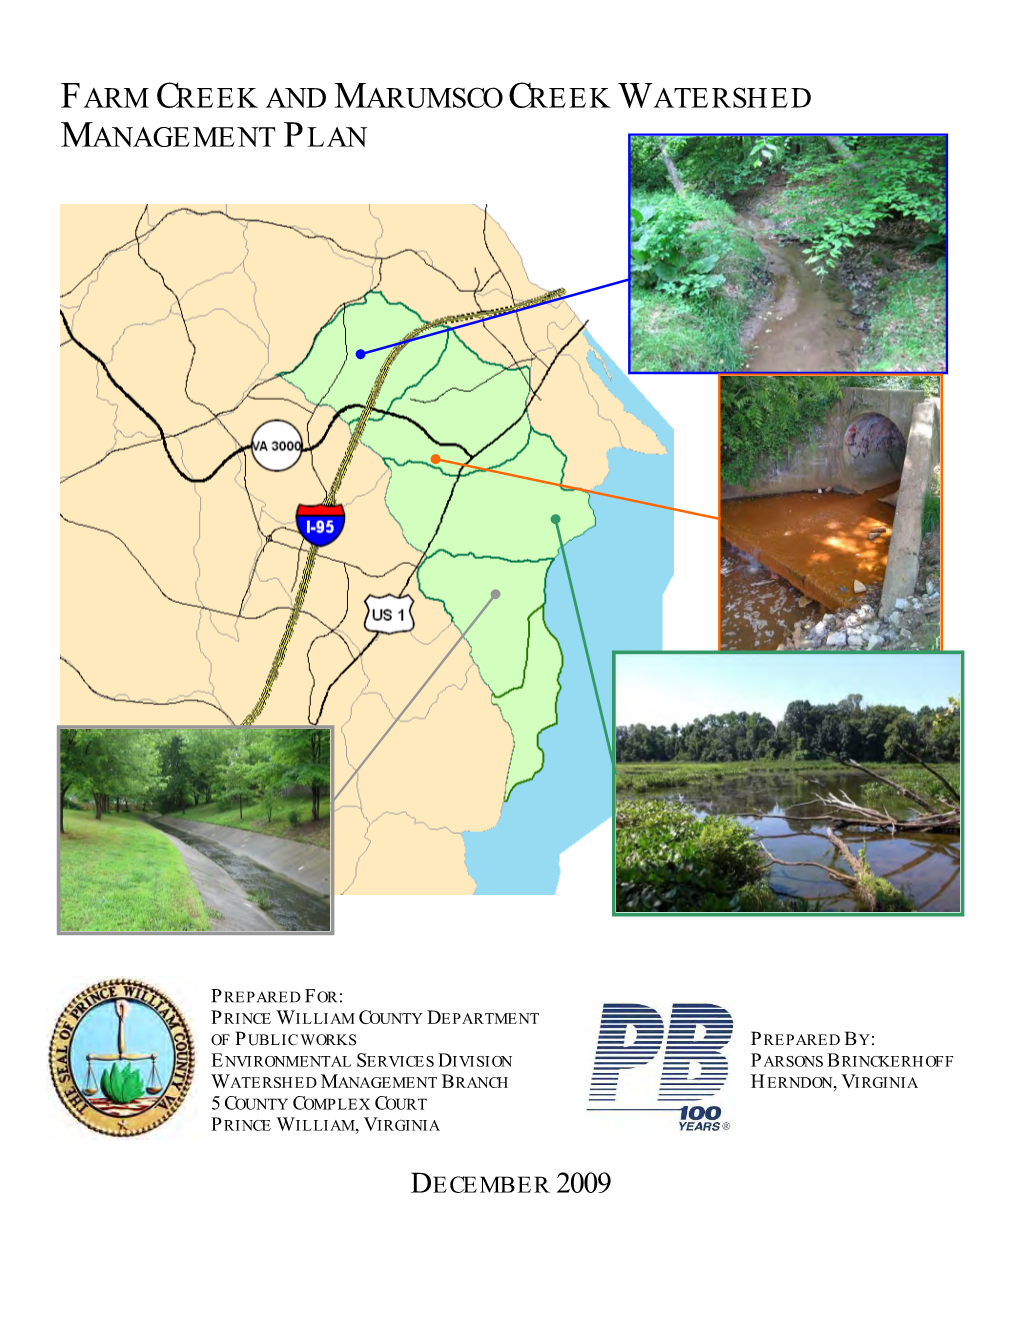 Farm Creek and Marumsco Creek Watershed Management Plan